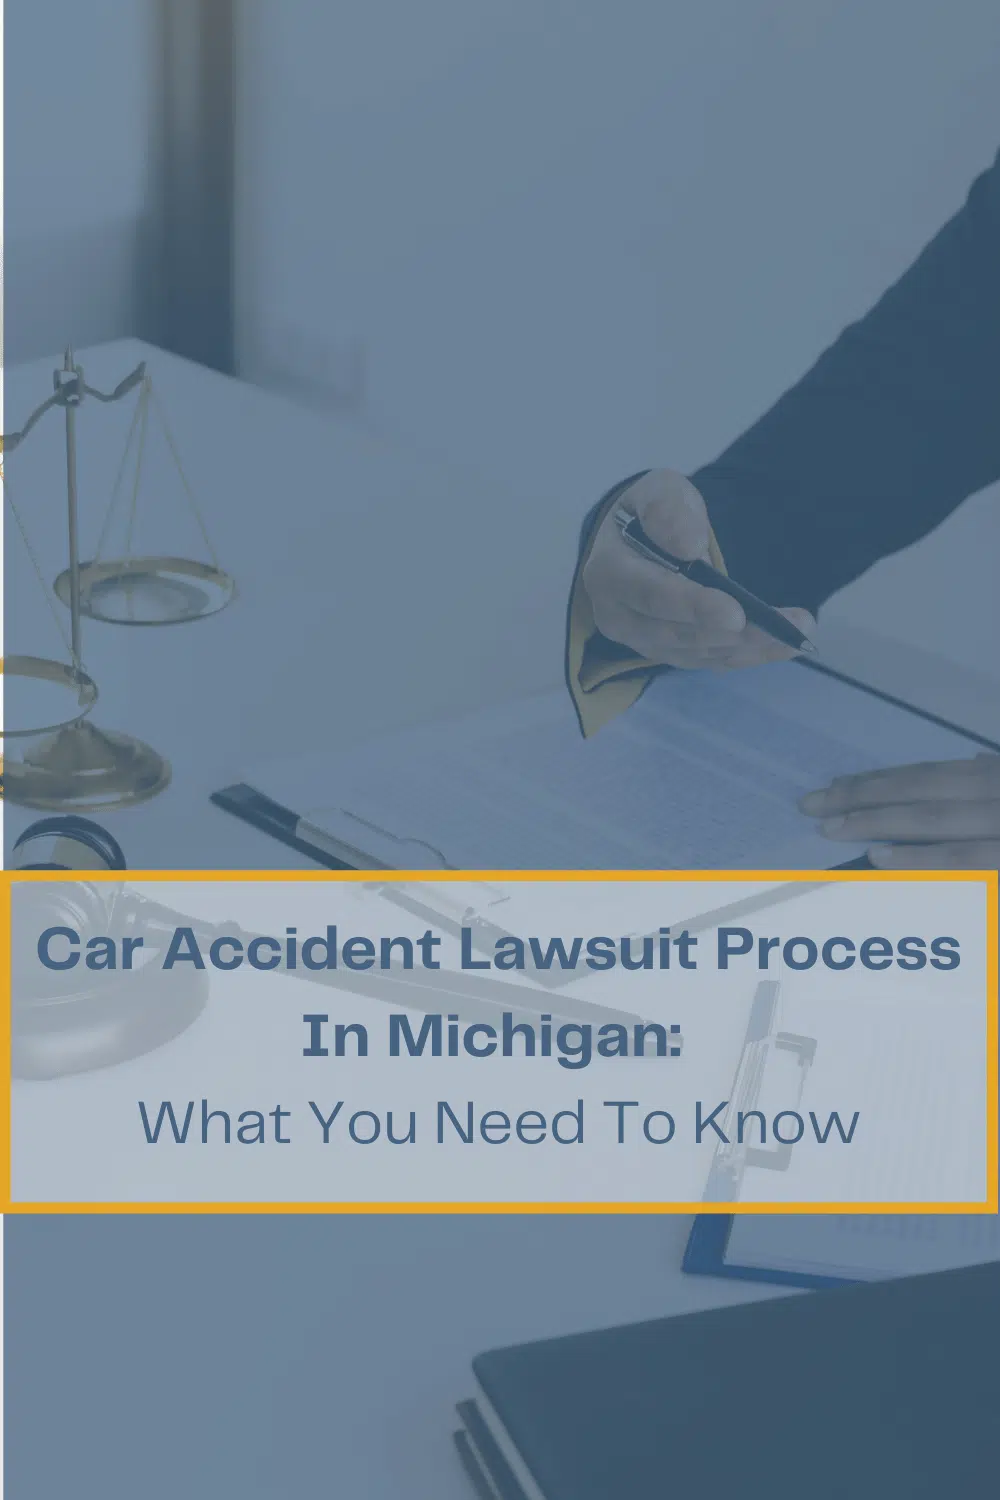 Car Accident Lawsuit Process In Michigan: What You Need To Know